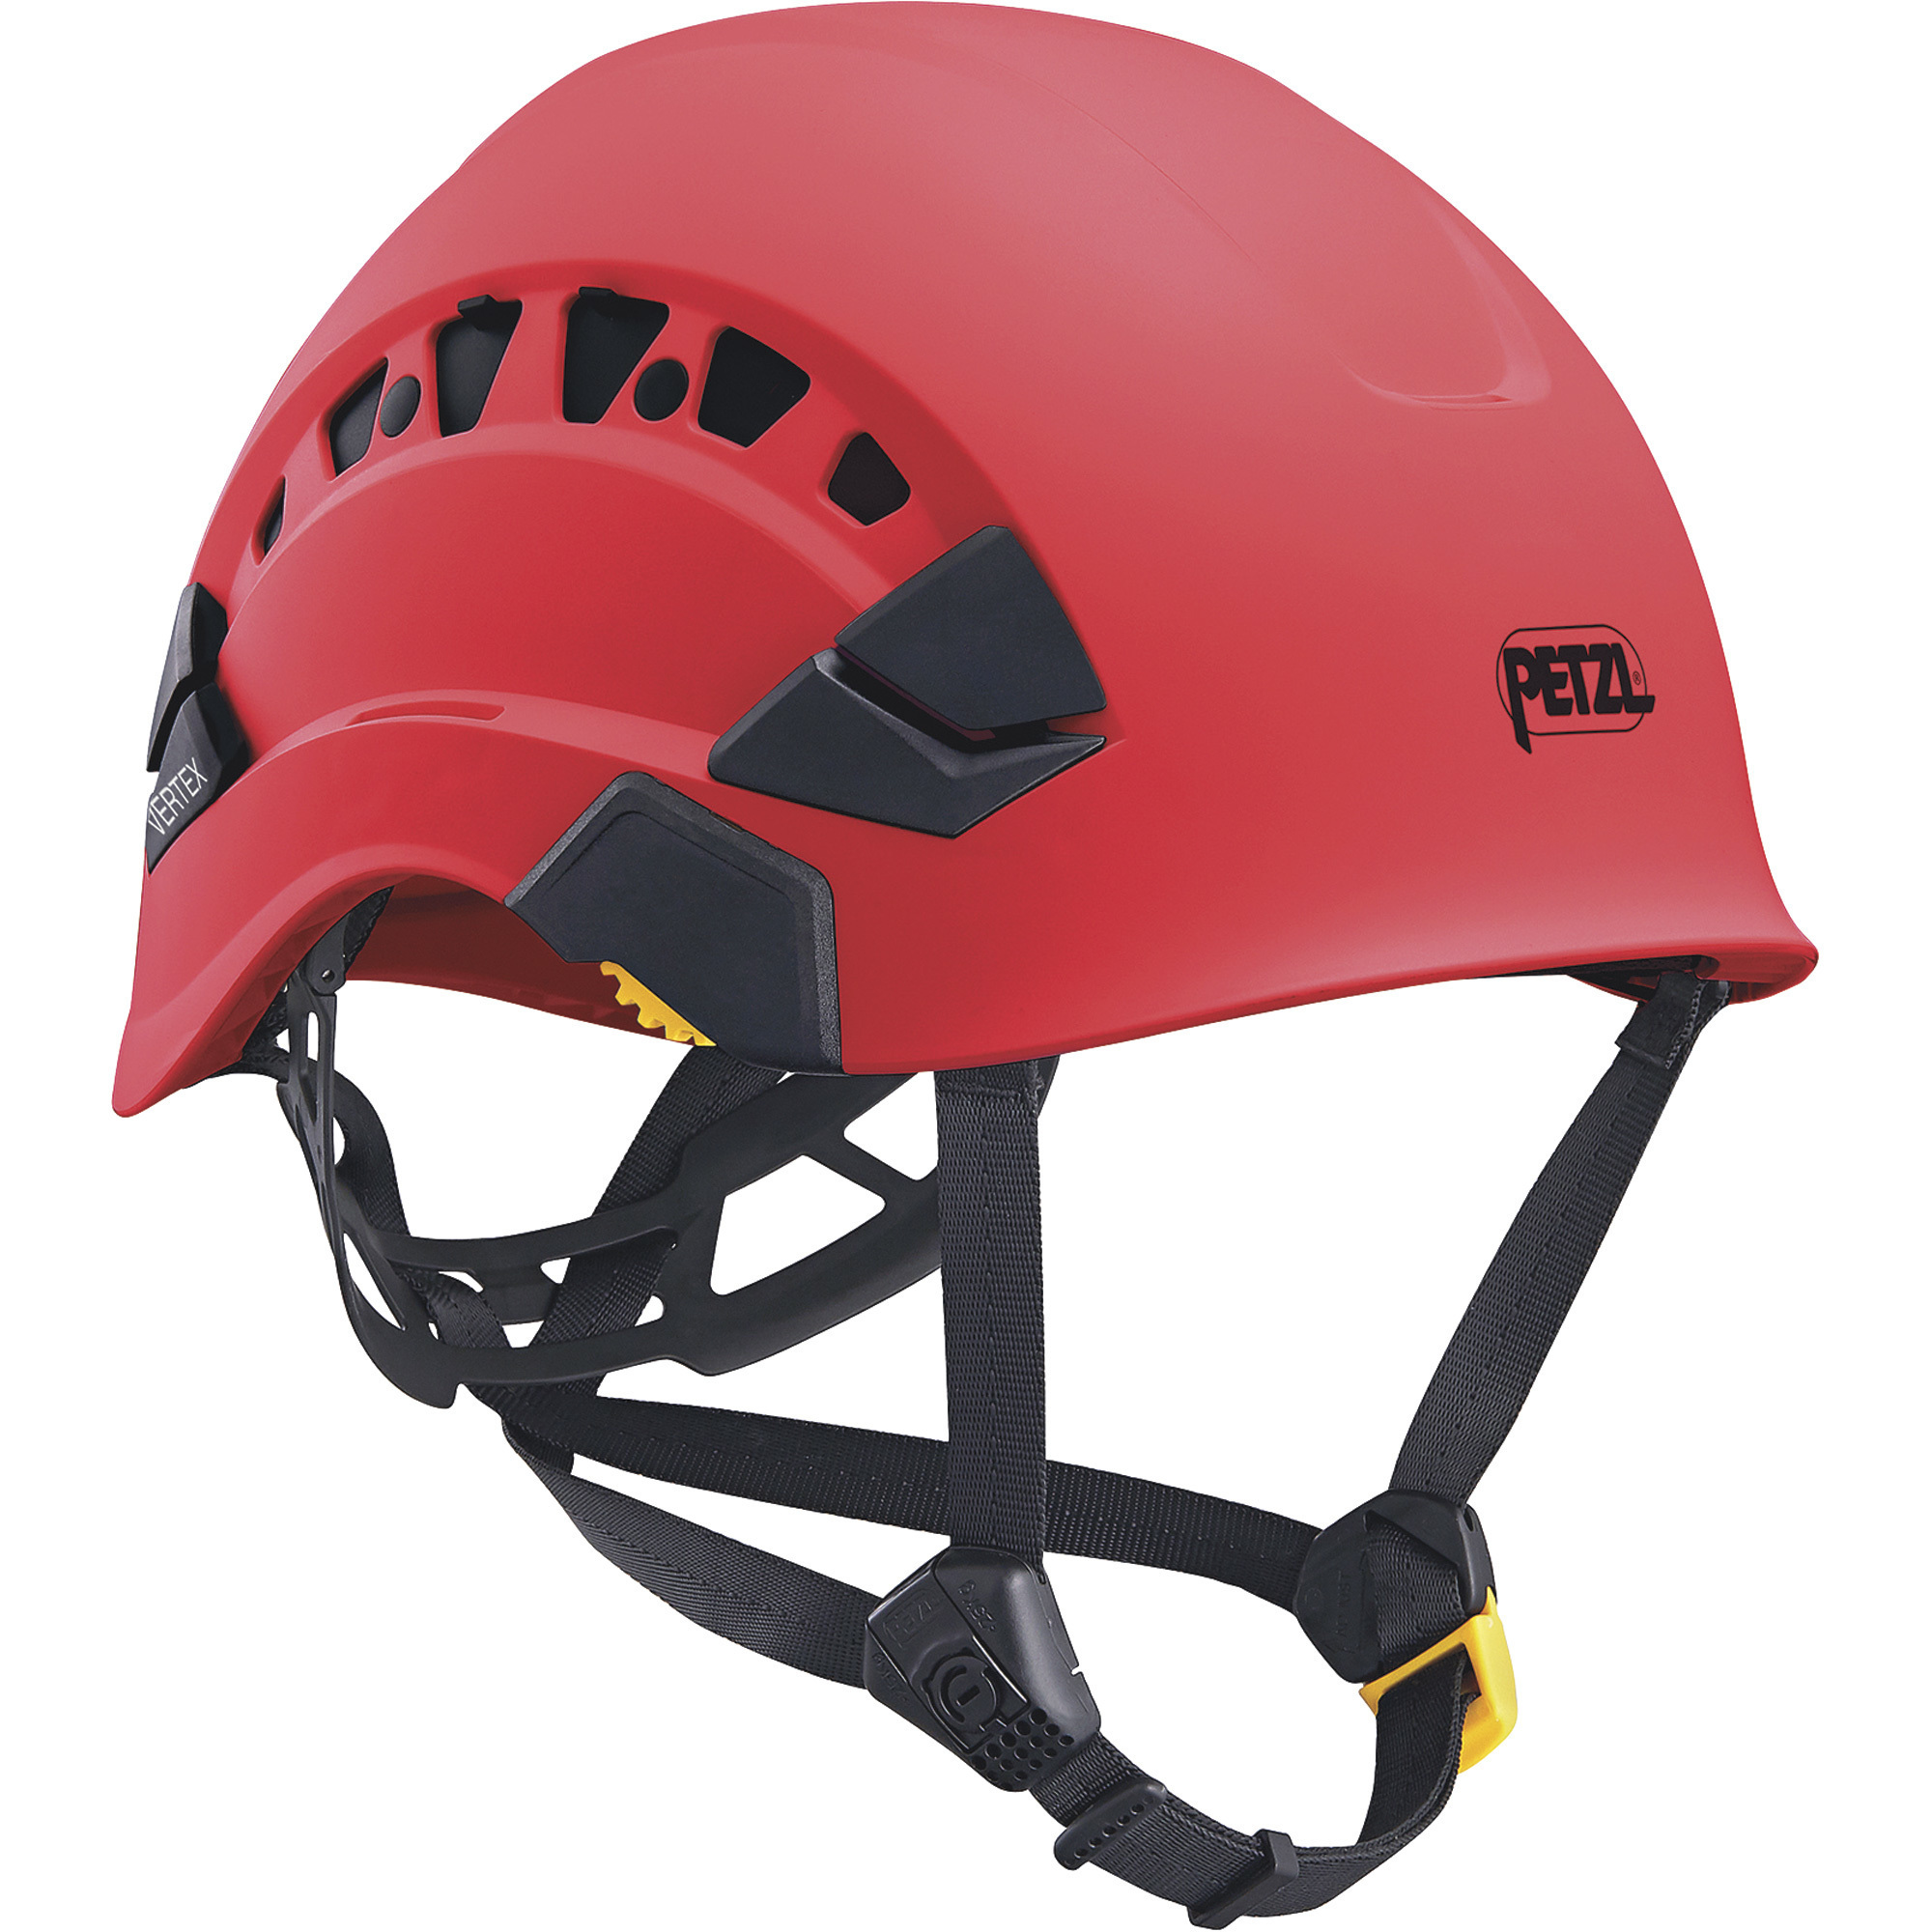 Petzl Vertex Class C Safety Helmet with Vents and 6-Point Textile Suspension, Red, Model A010CA02